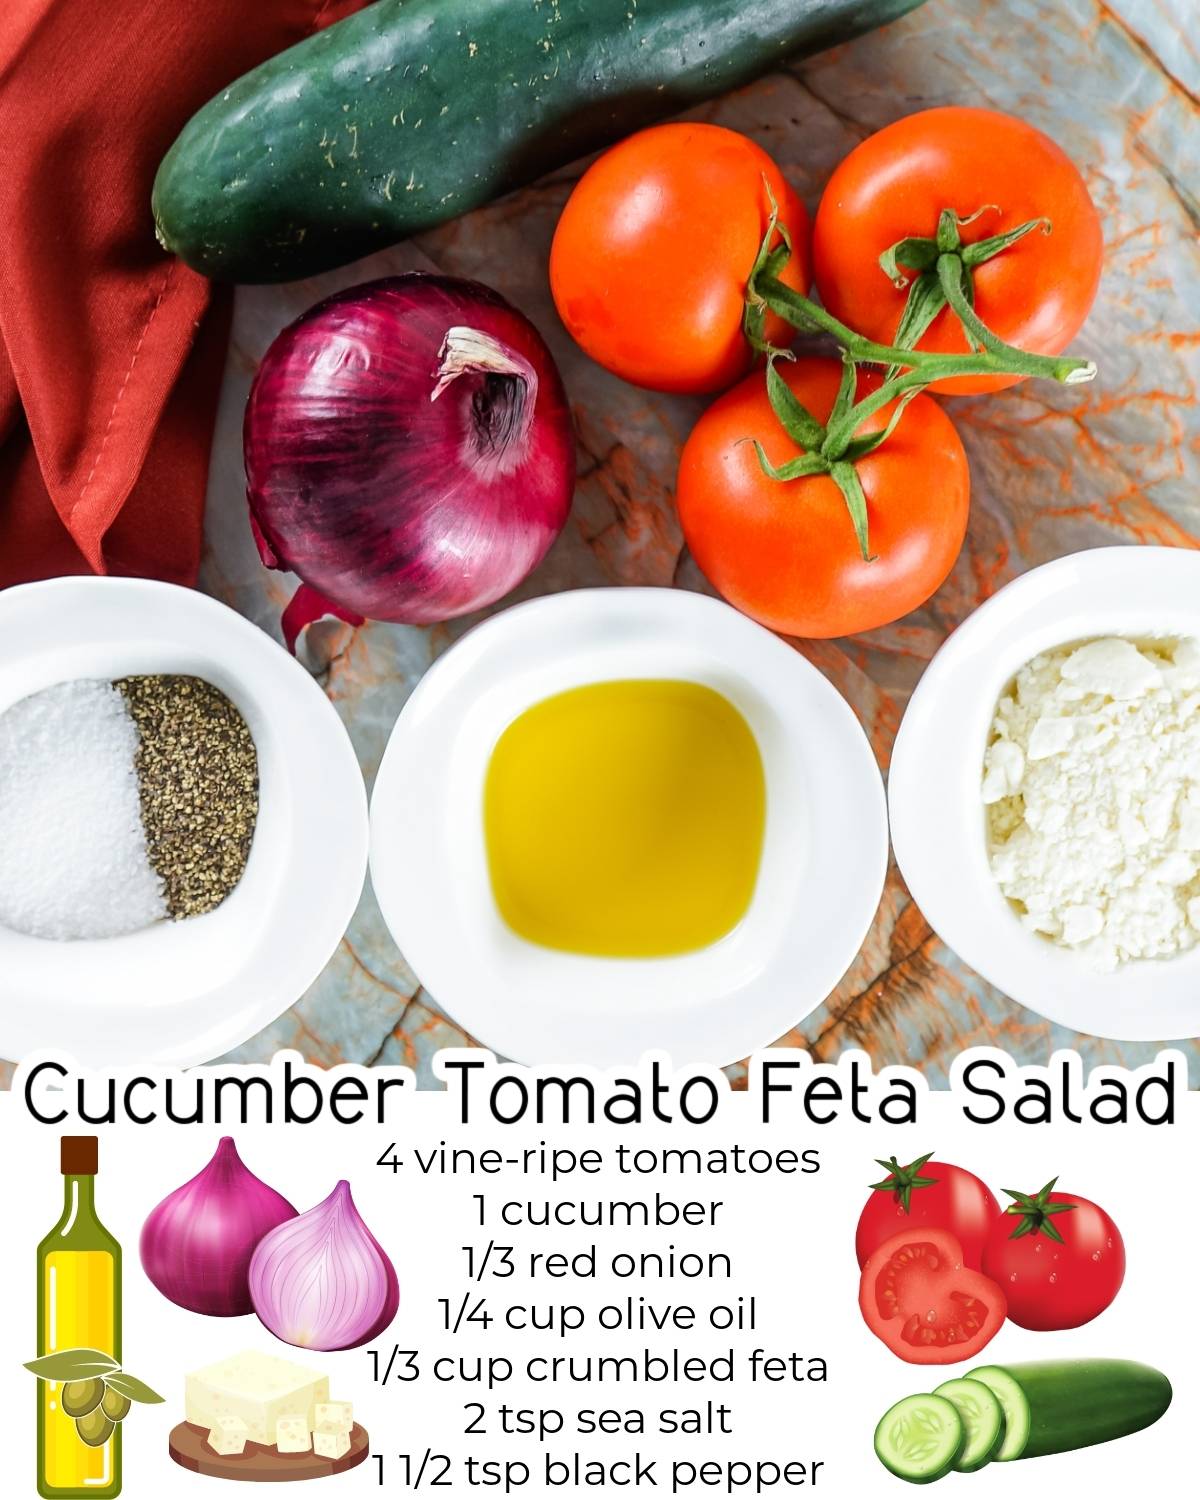 All of the ingredients needed to make Cucumber Tomato Feta Salad.